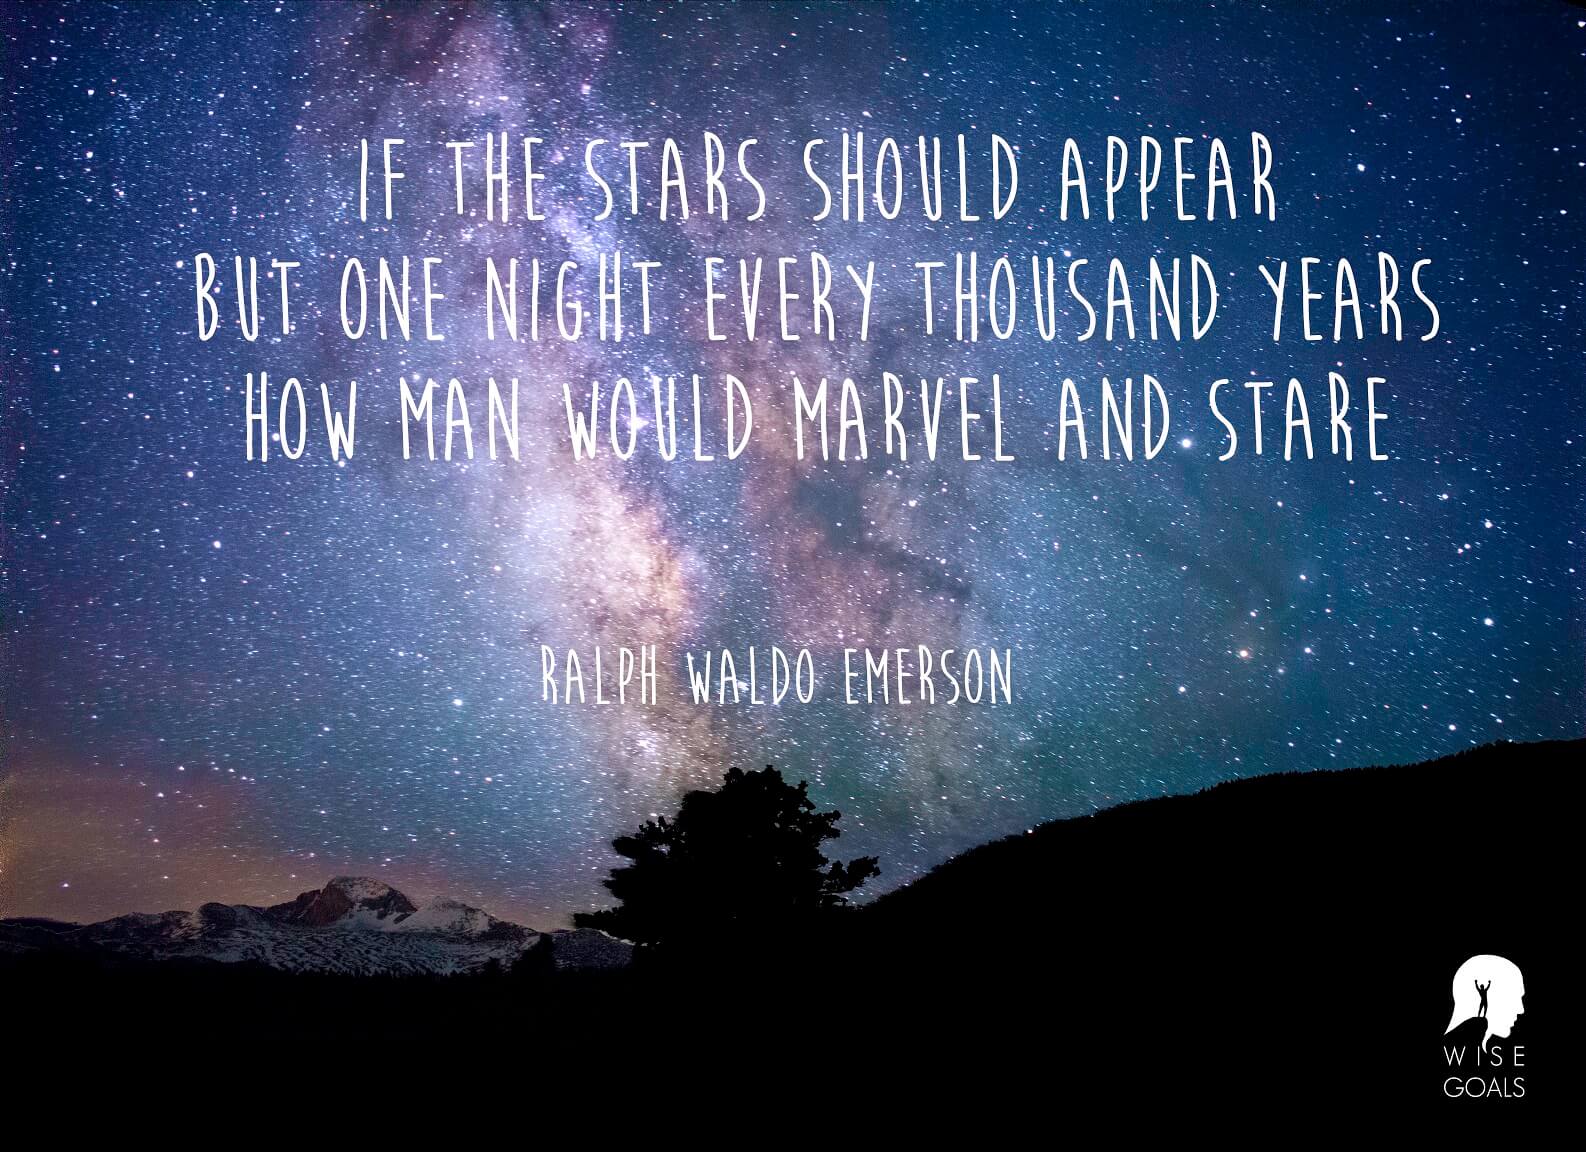 Emerson - If the stars should appear but one night every thousand years, how men would marvel and stare quote